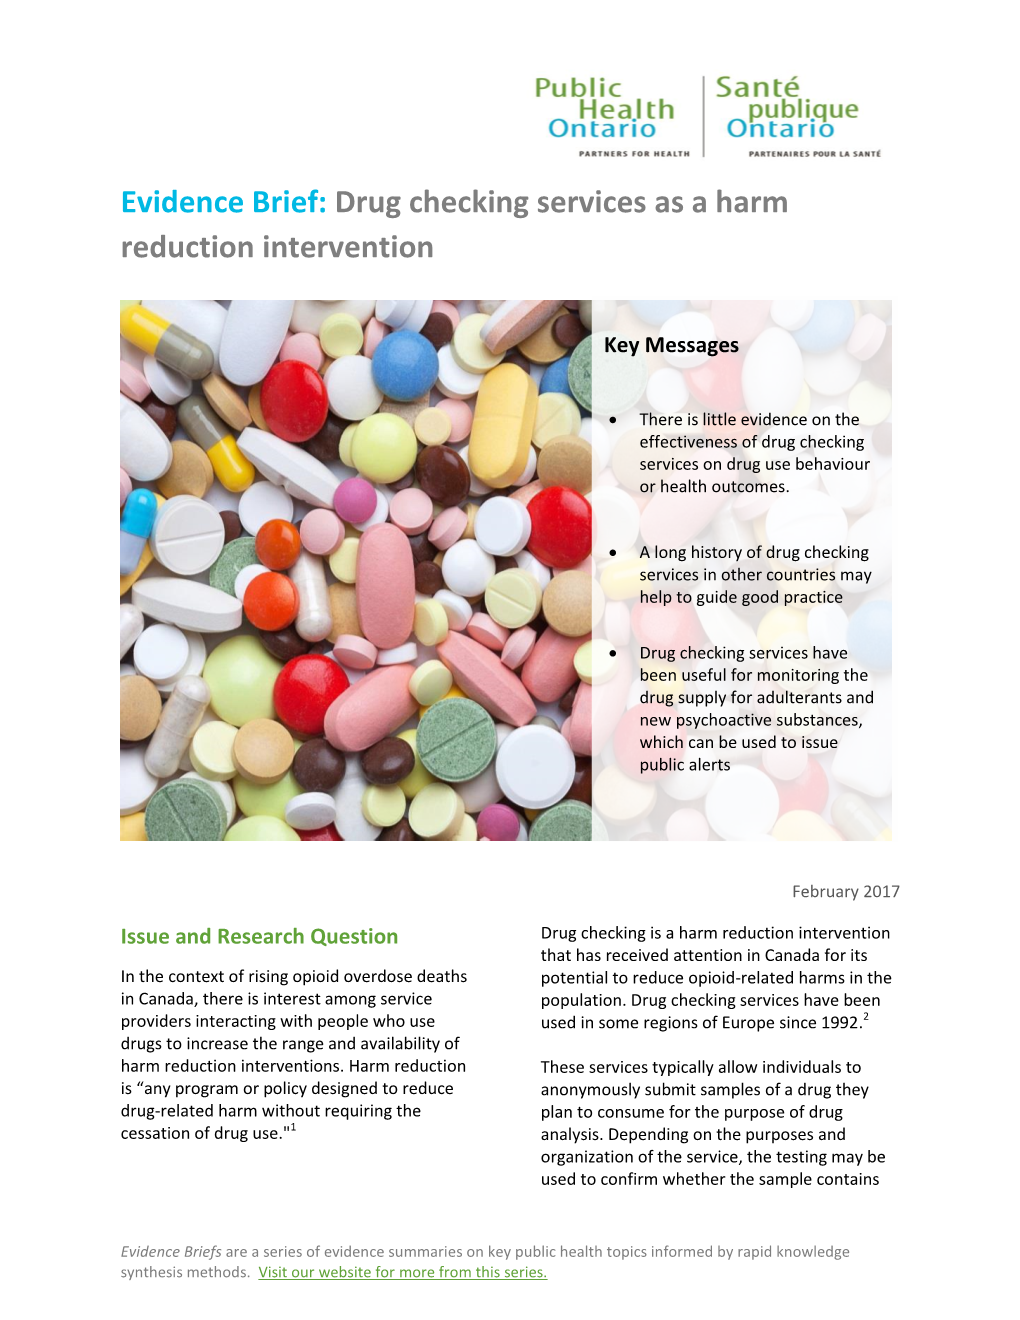 Drug Checking Services As a Harm Reduction Intervention